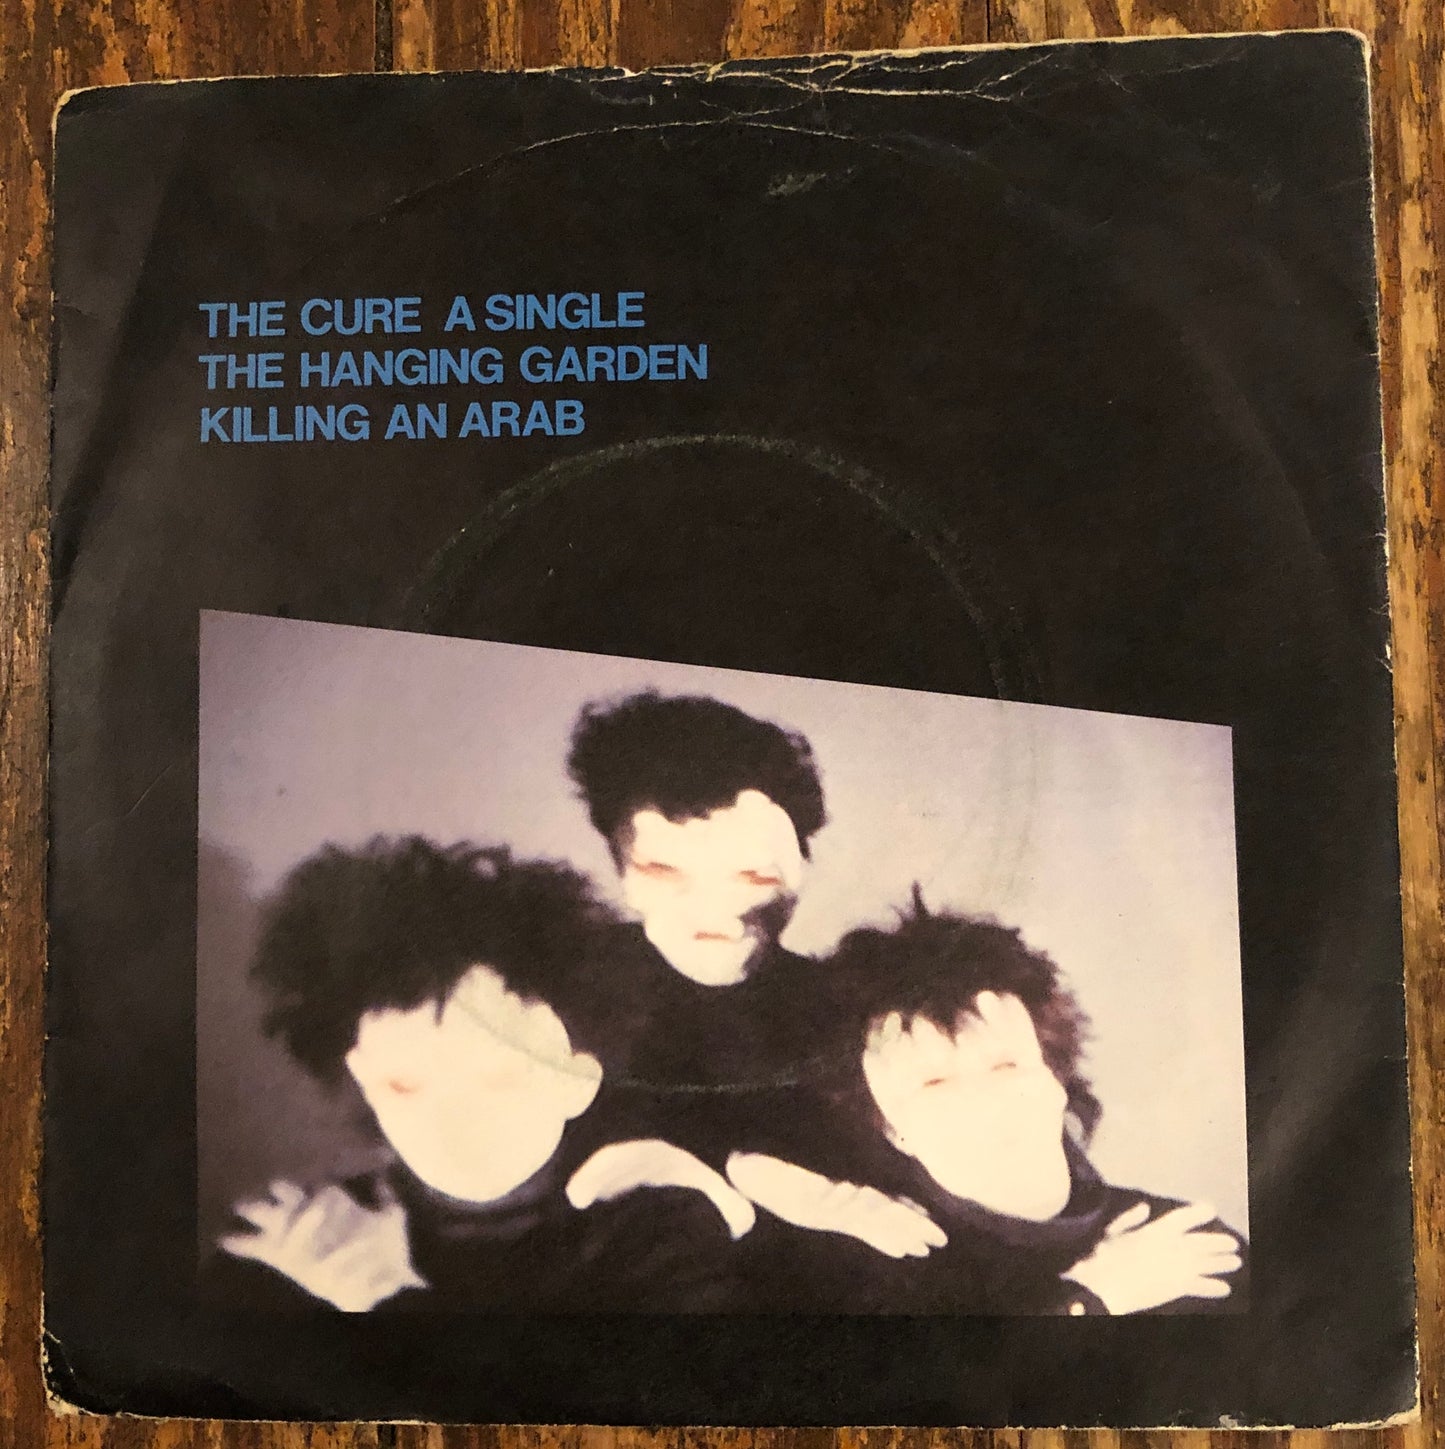 CURE, THE "A Single"